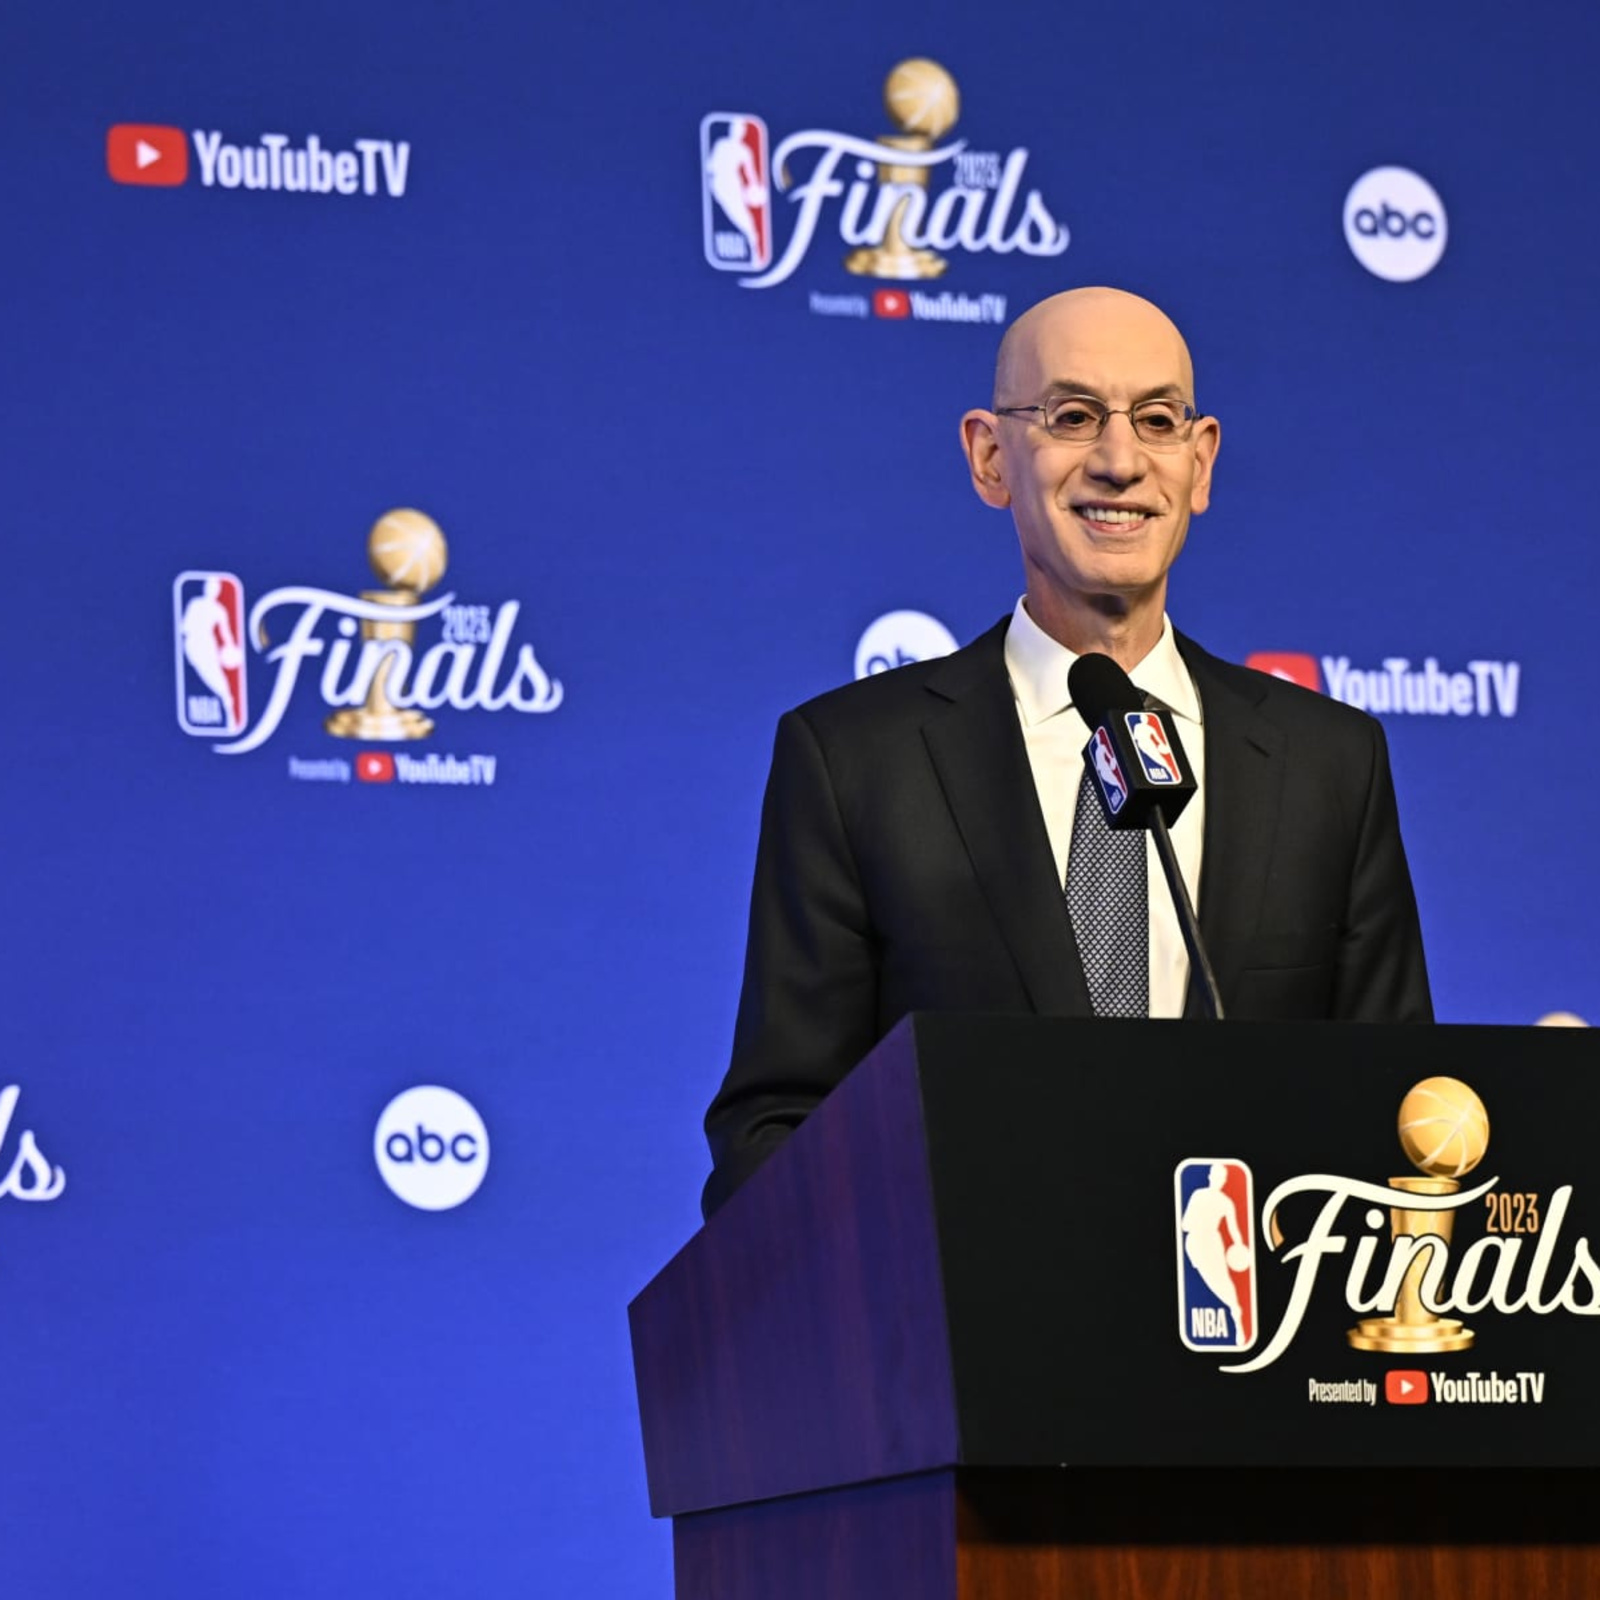 NBA Playoffs 2022: Play-in Tournament Schedule, TV Info Revealed